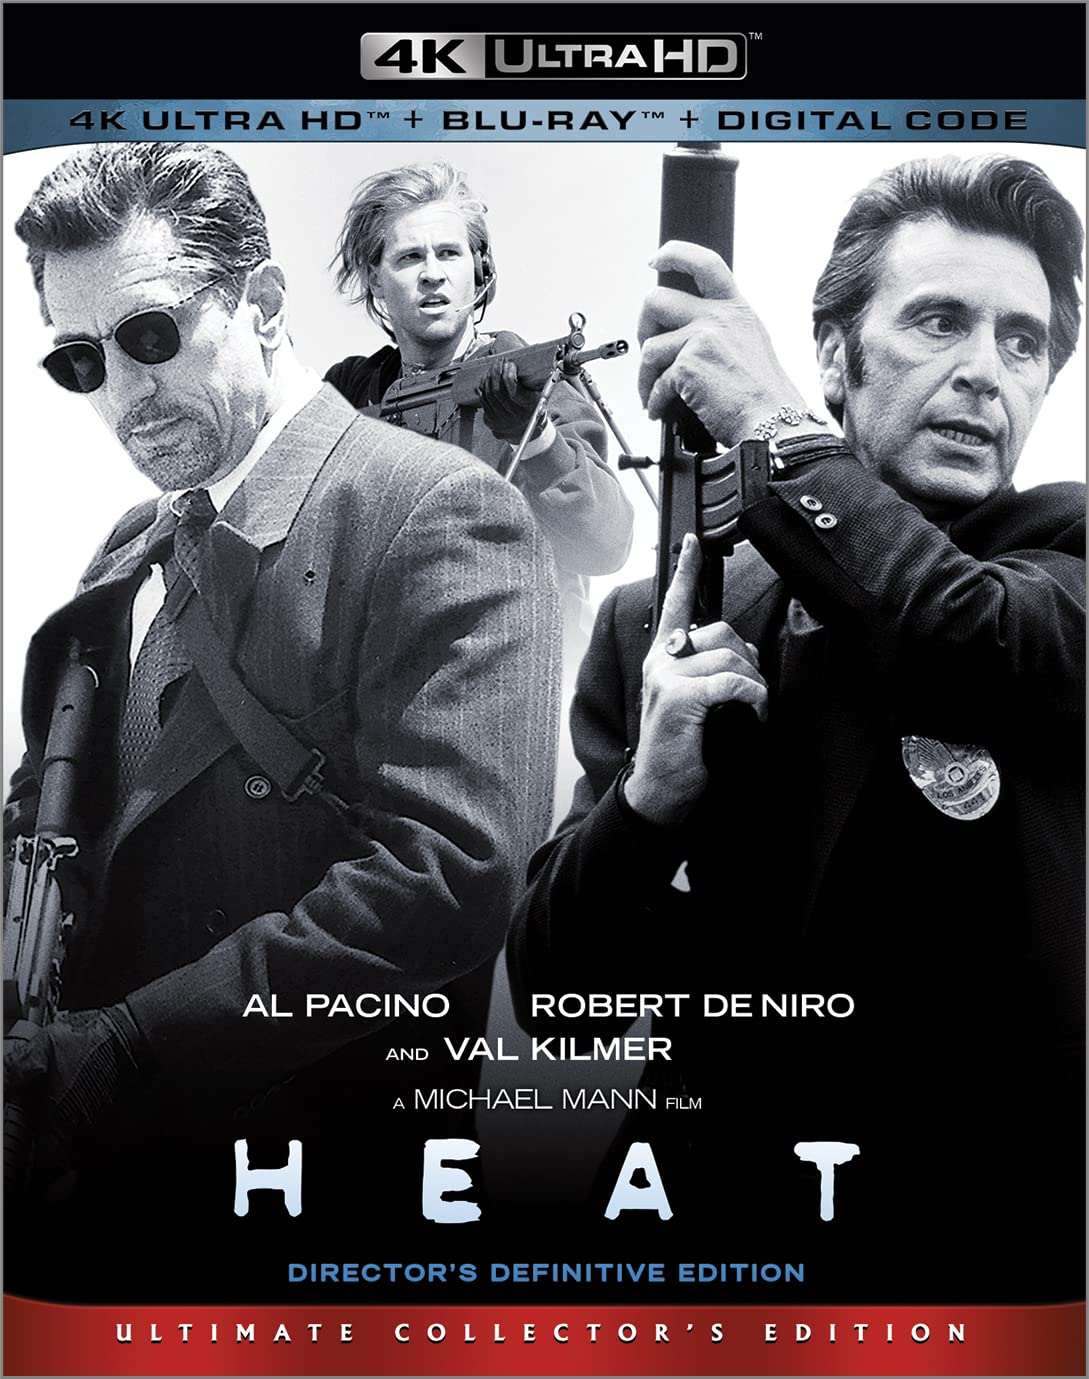 Heat 4k Blu-ray Ultimate Collector's Edition 